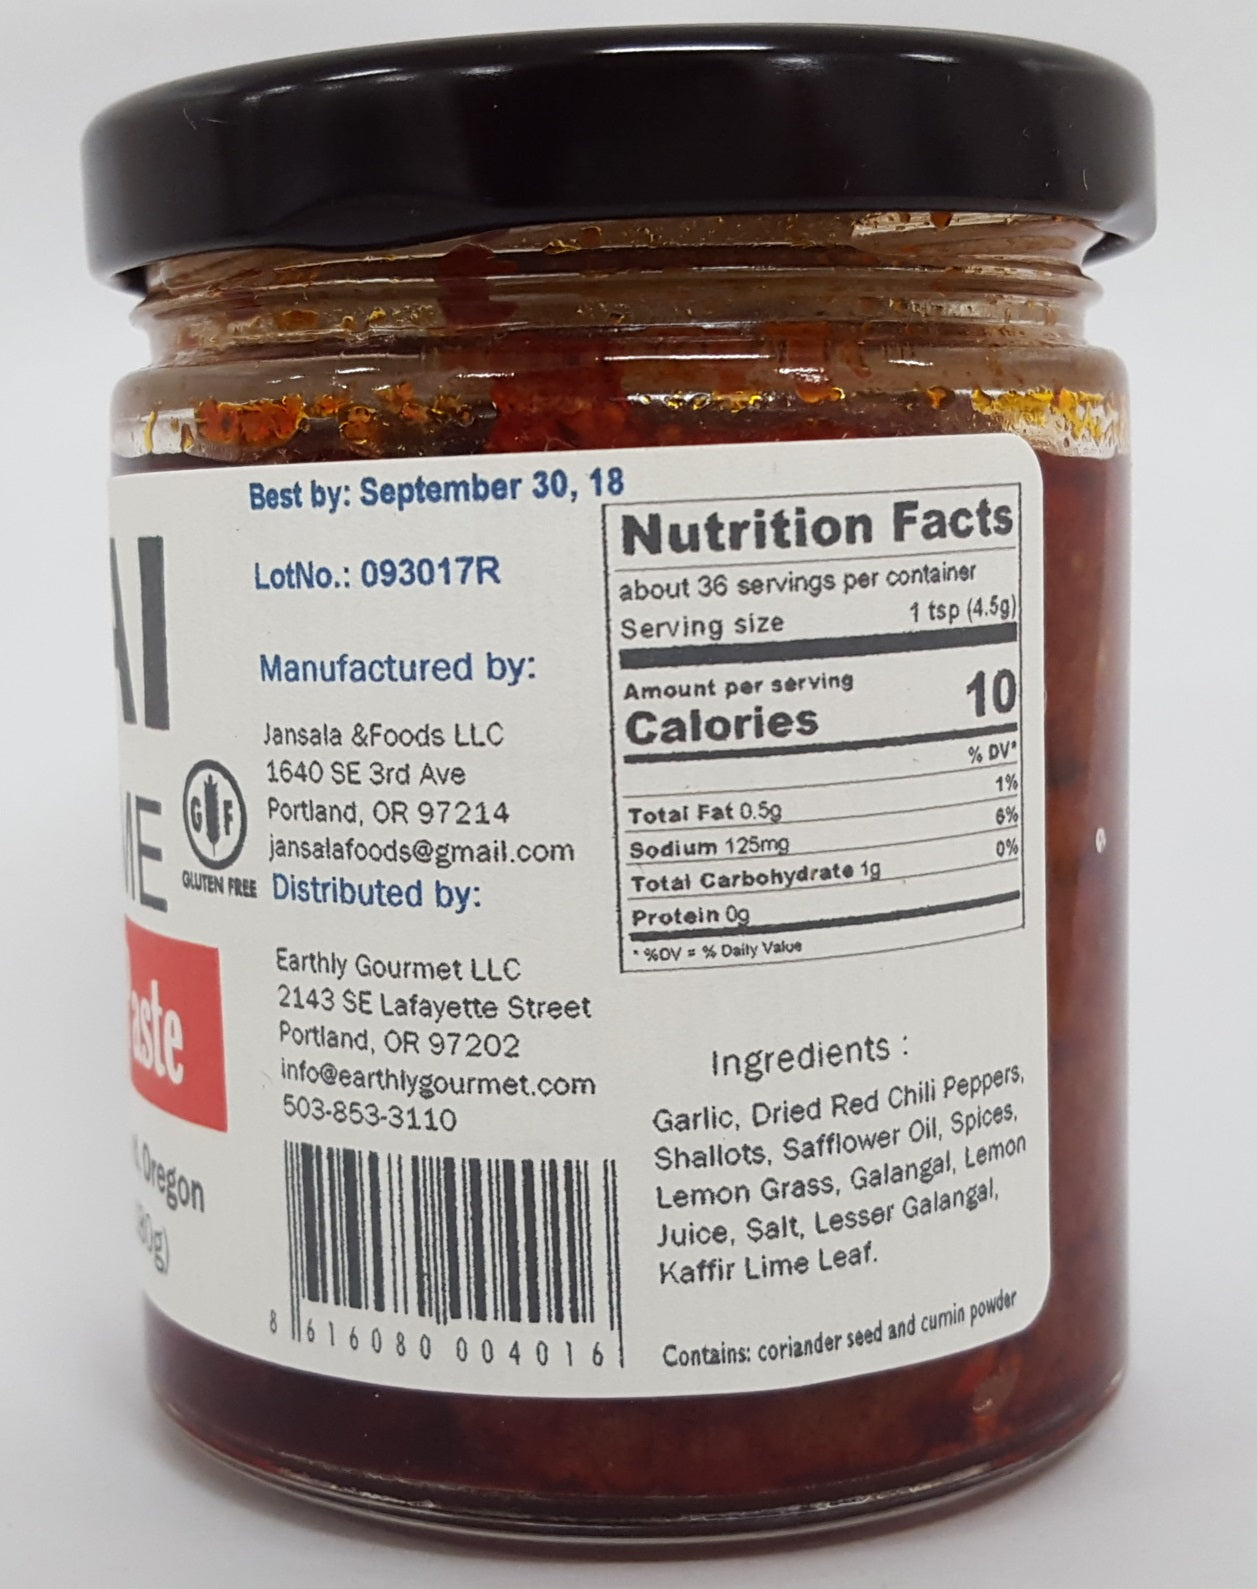 Thai Home Red Curry Paste - Dana's Healthy Home